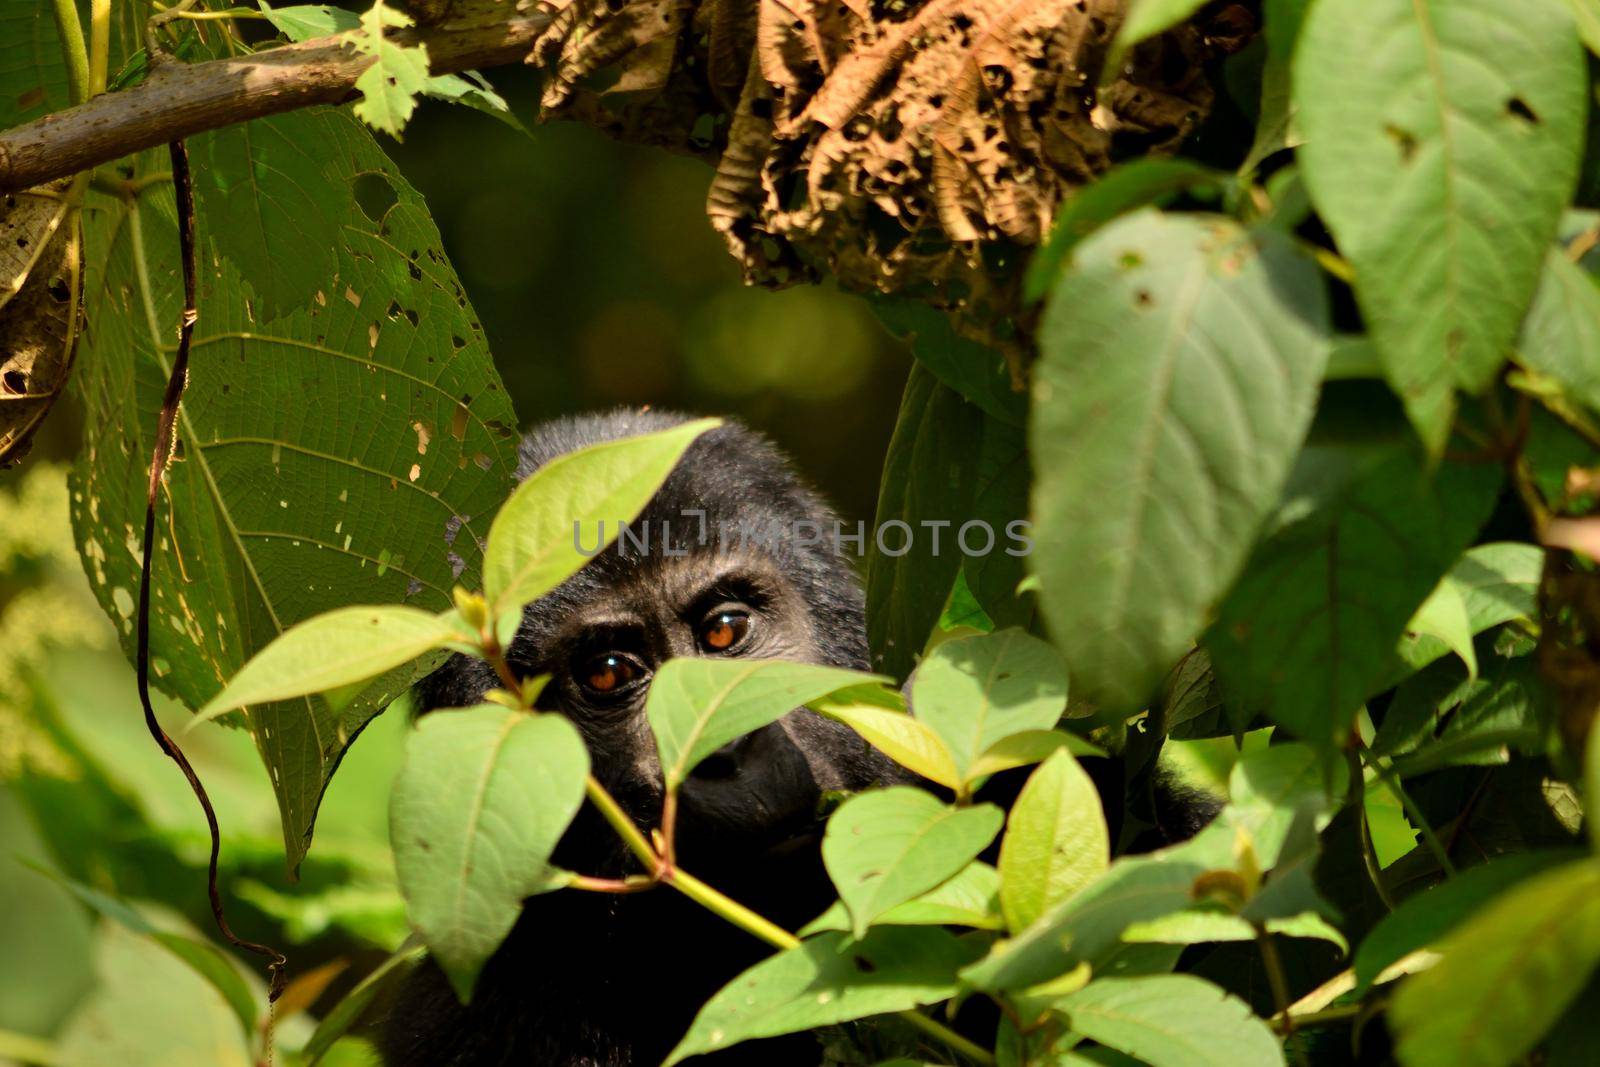 Closeup of a mountain gorilla cub eating foliage in the Bwindi Impenetrable Forest by silentstock639